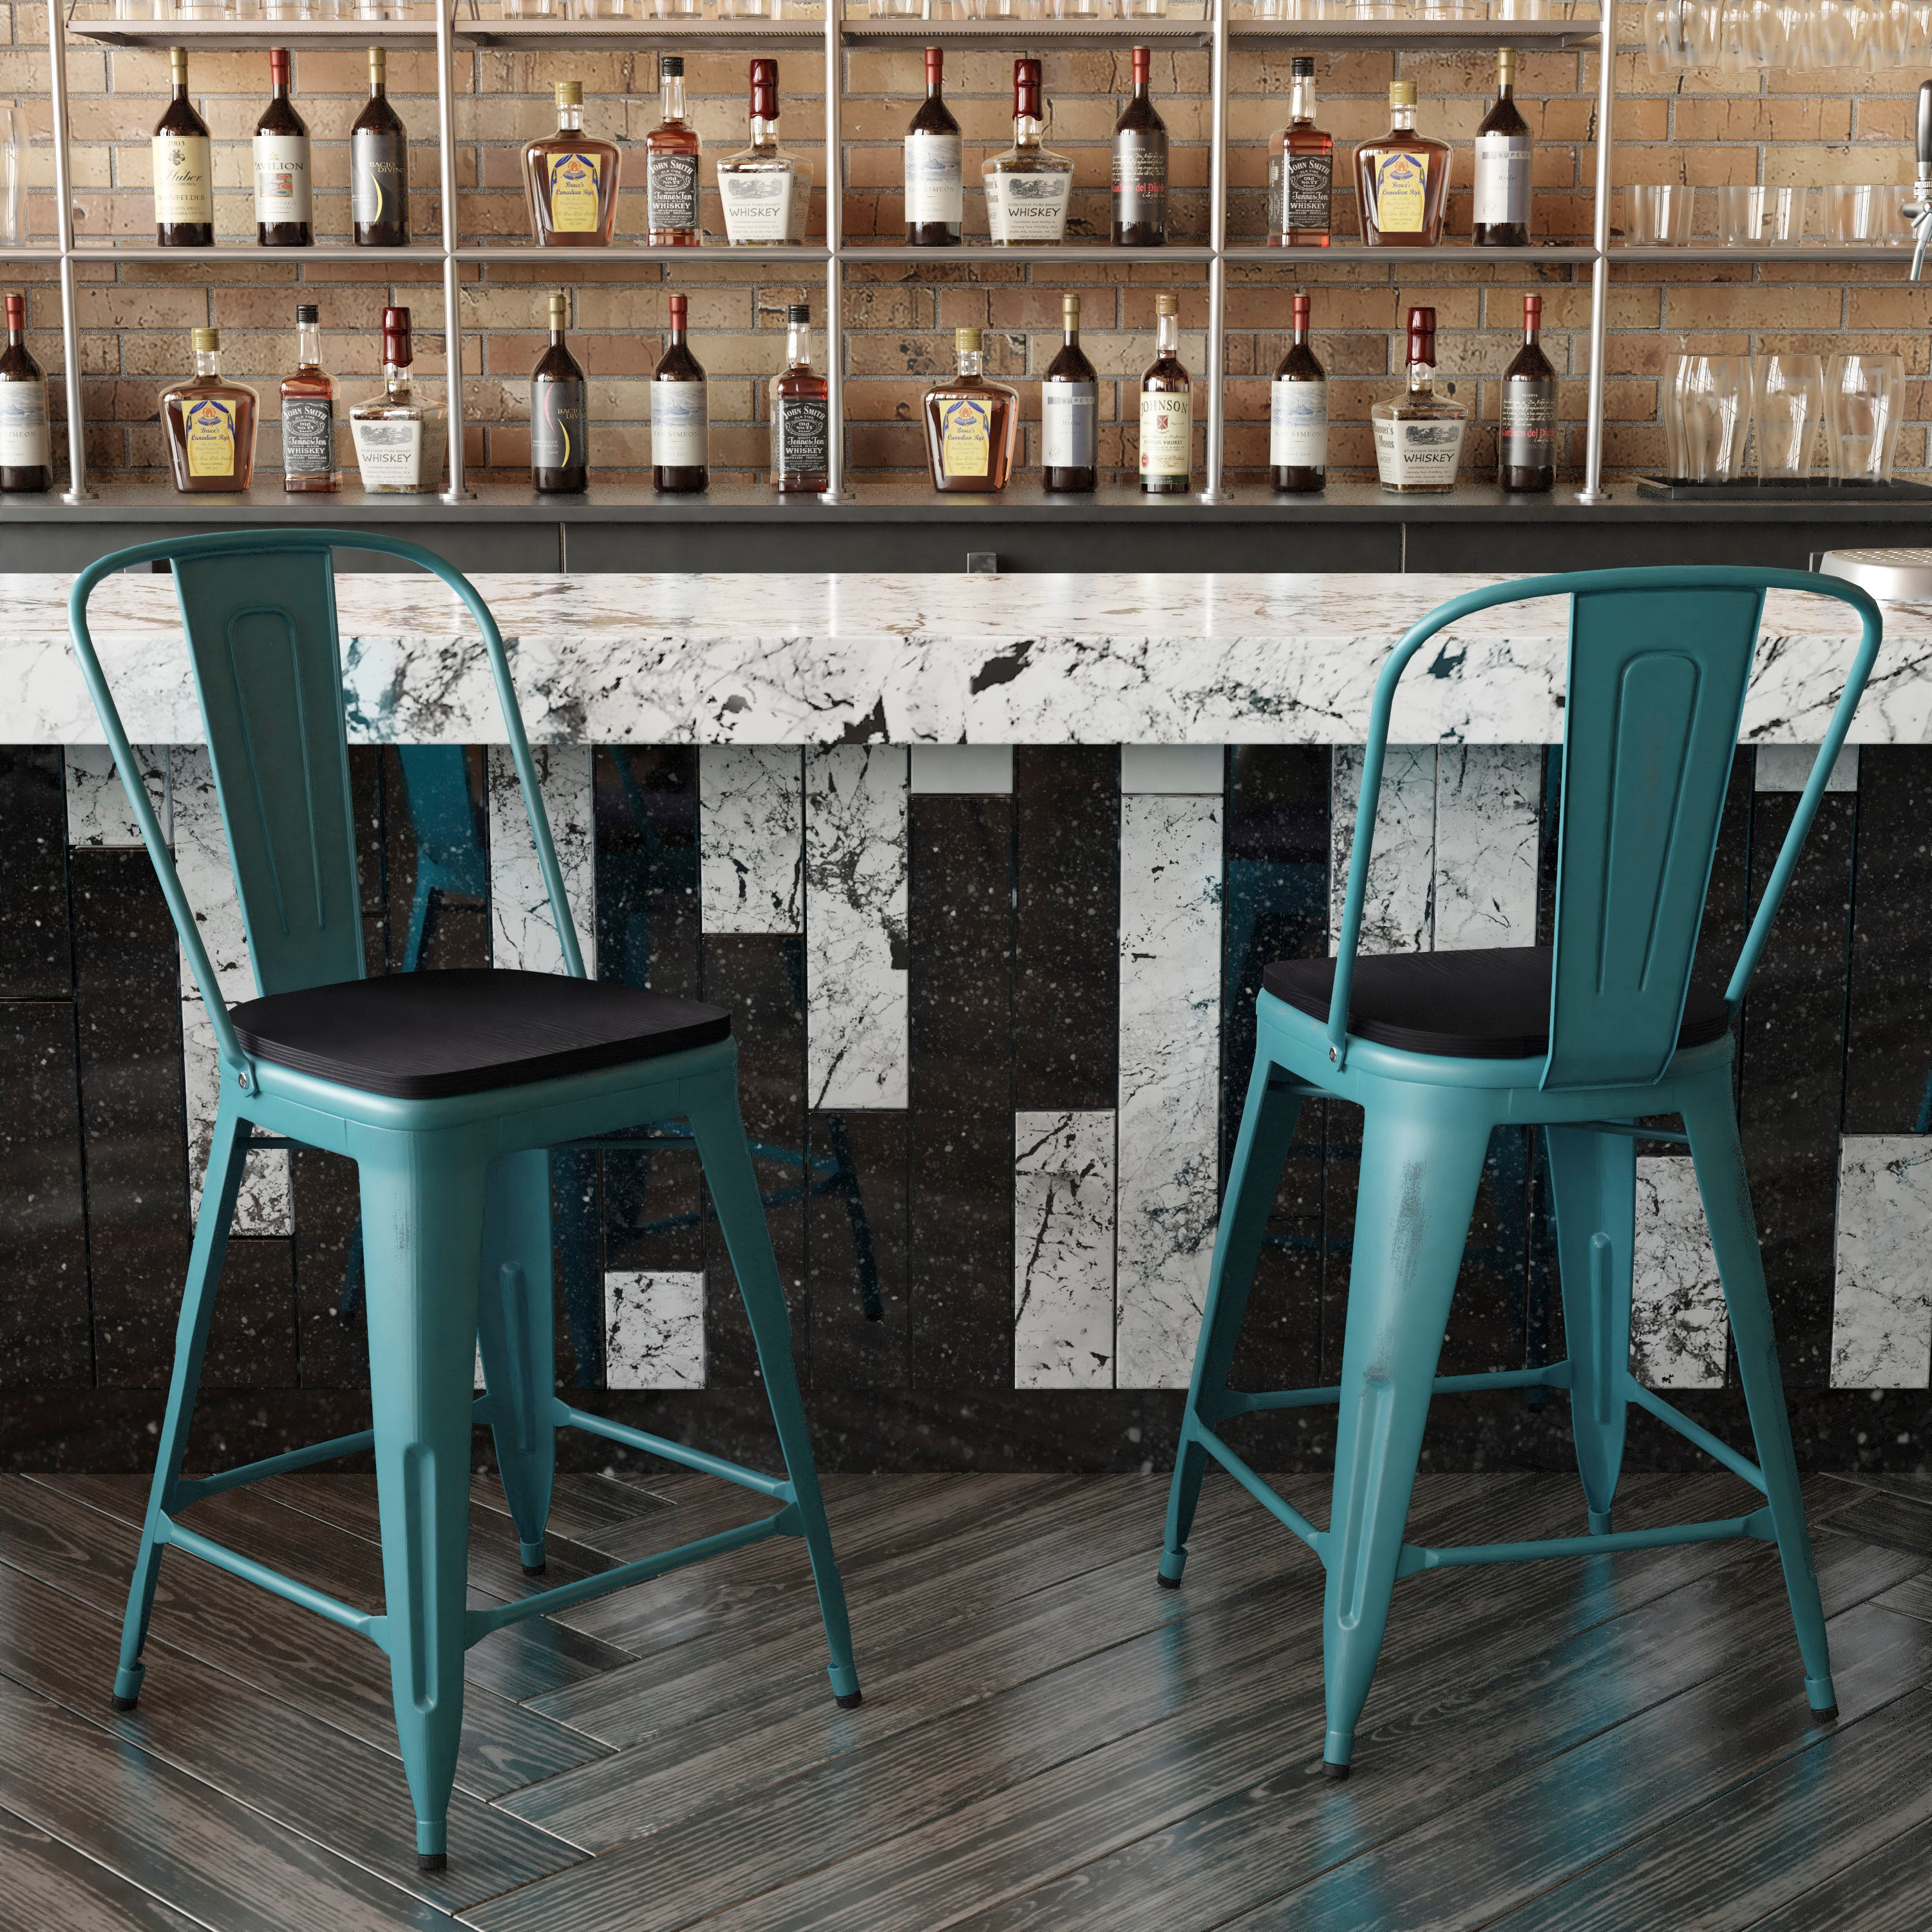 Carly Commercial Grade 24" High Metal Indoor-Outdoor Counter Height Stool with Back and Polystyrene Seat-Metal Colorful Restaurant Counter Stool-Flash Furniture-Wall2Wall Furnishings